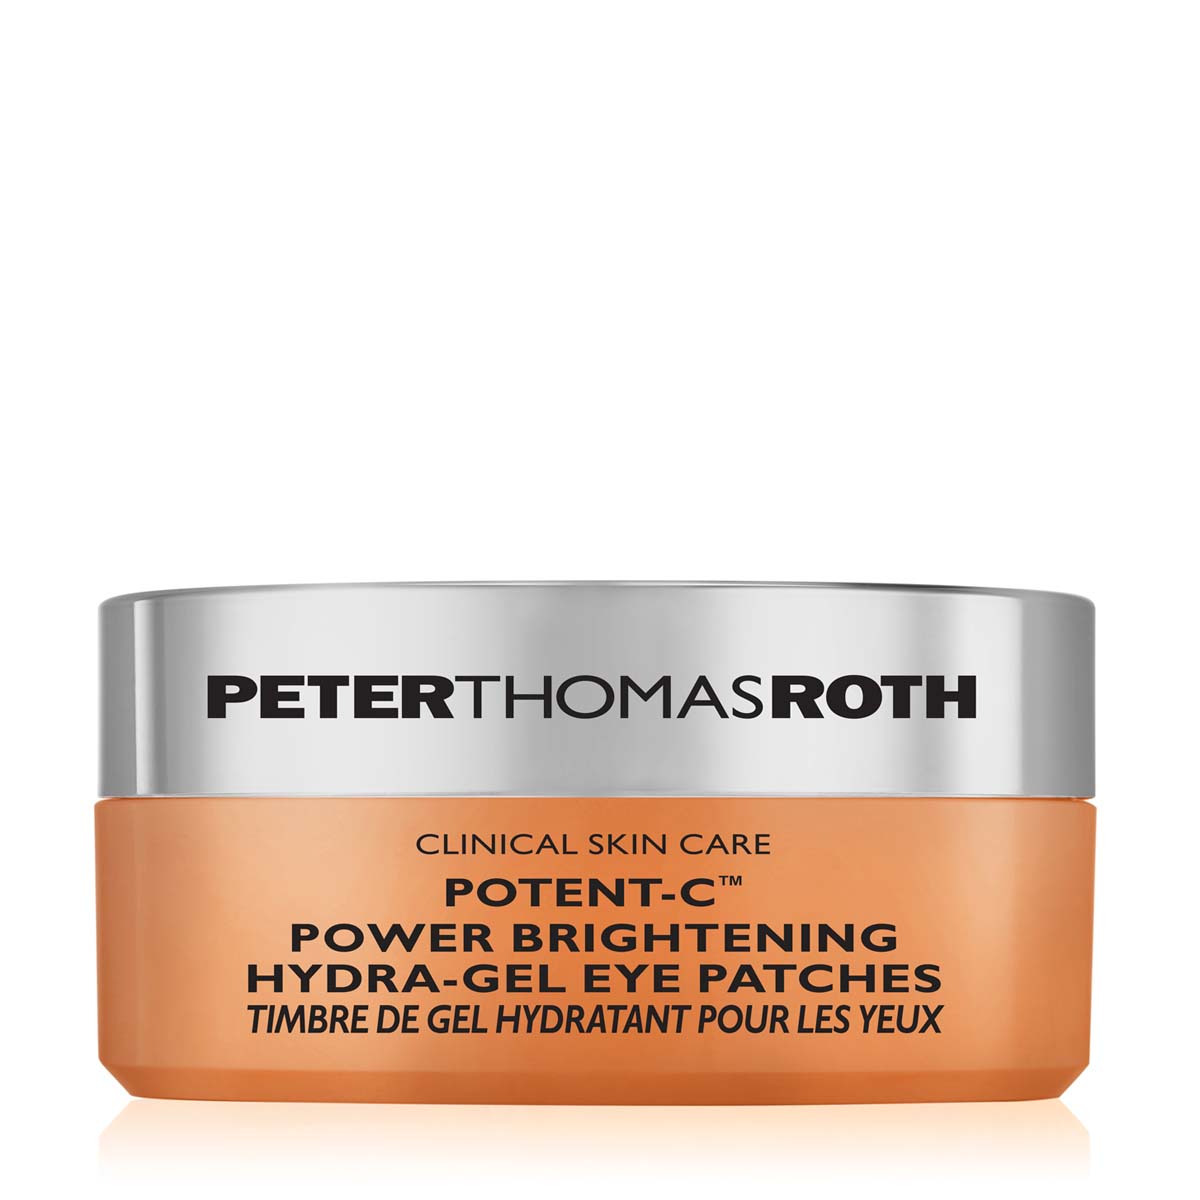 Peter Thomas Roth Potent-C Power Brightening Hydra-Gel Eye Patches 30 Pairs